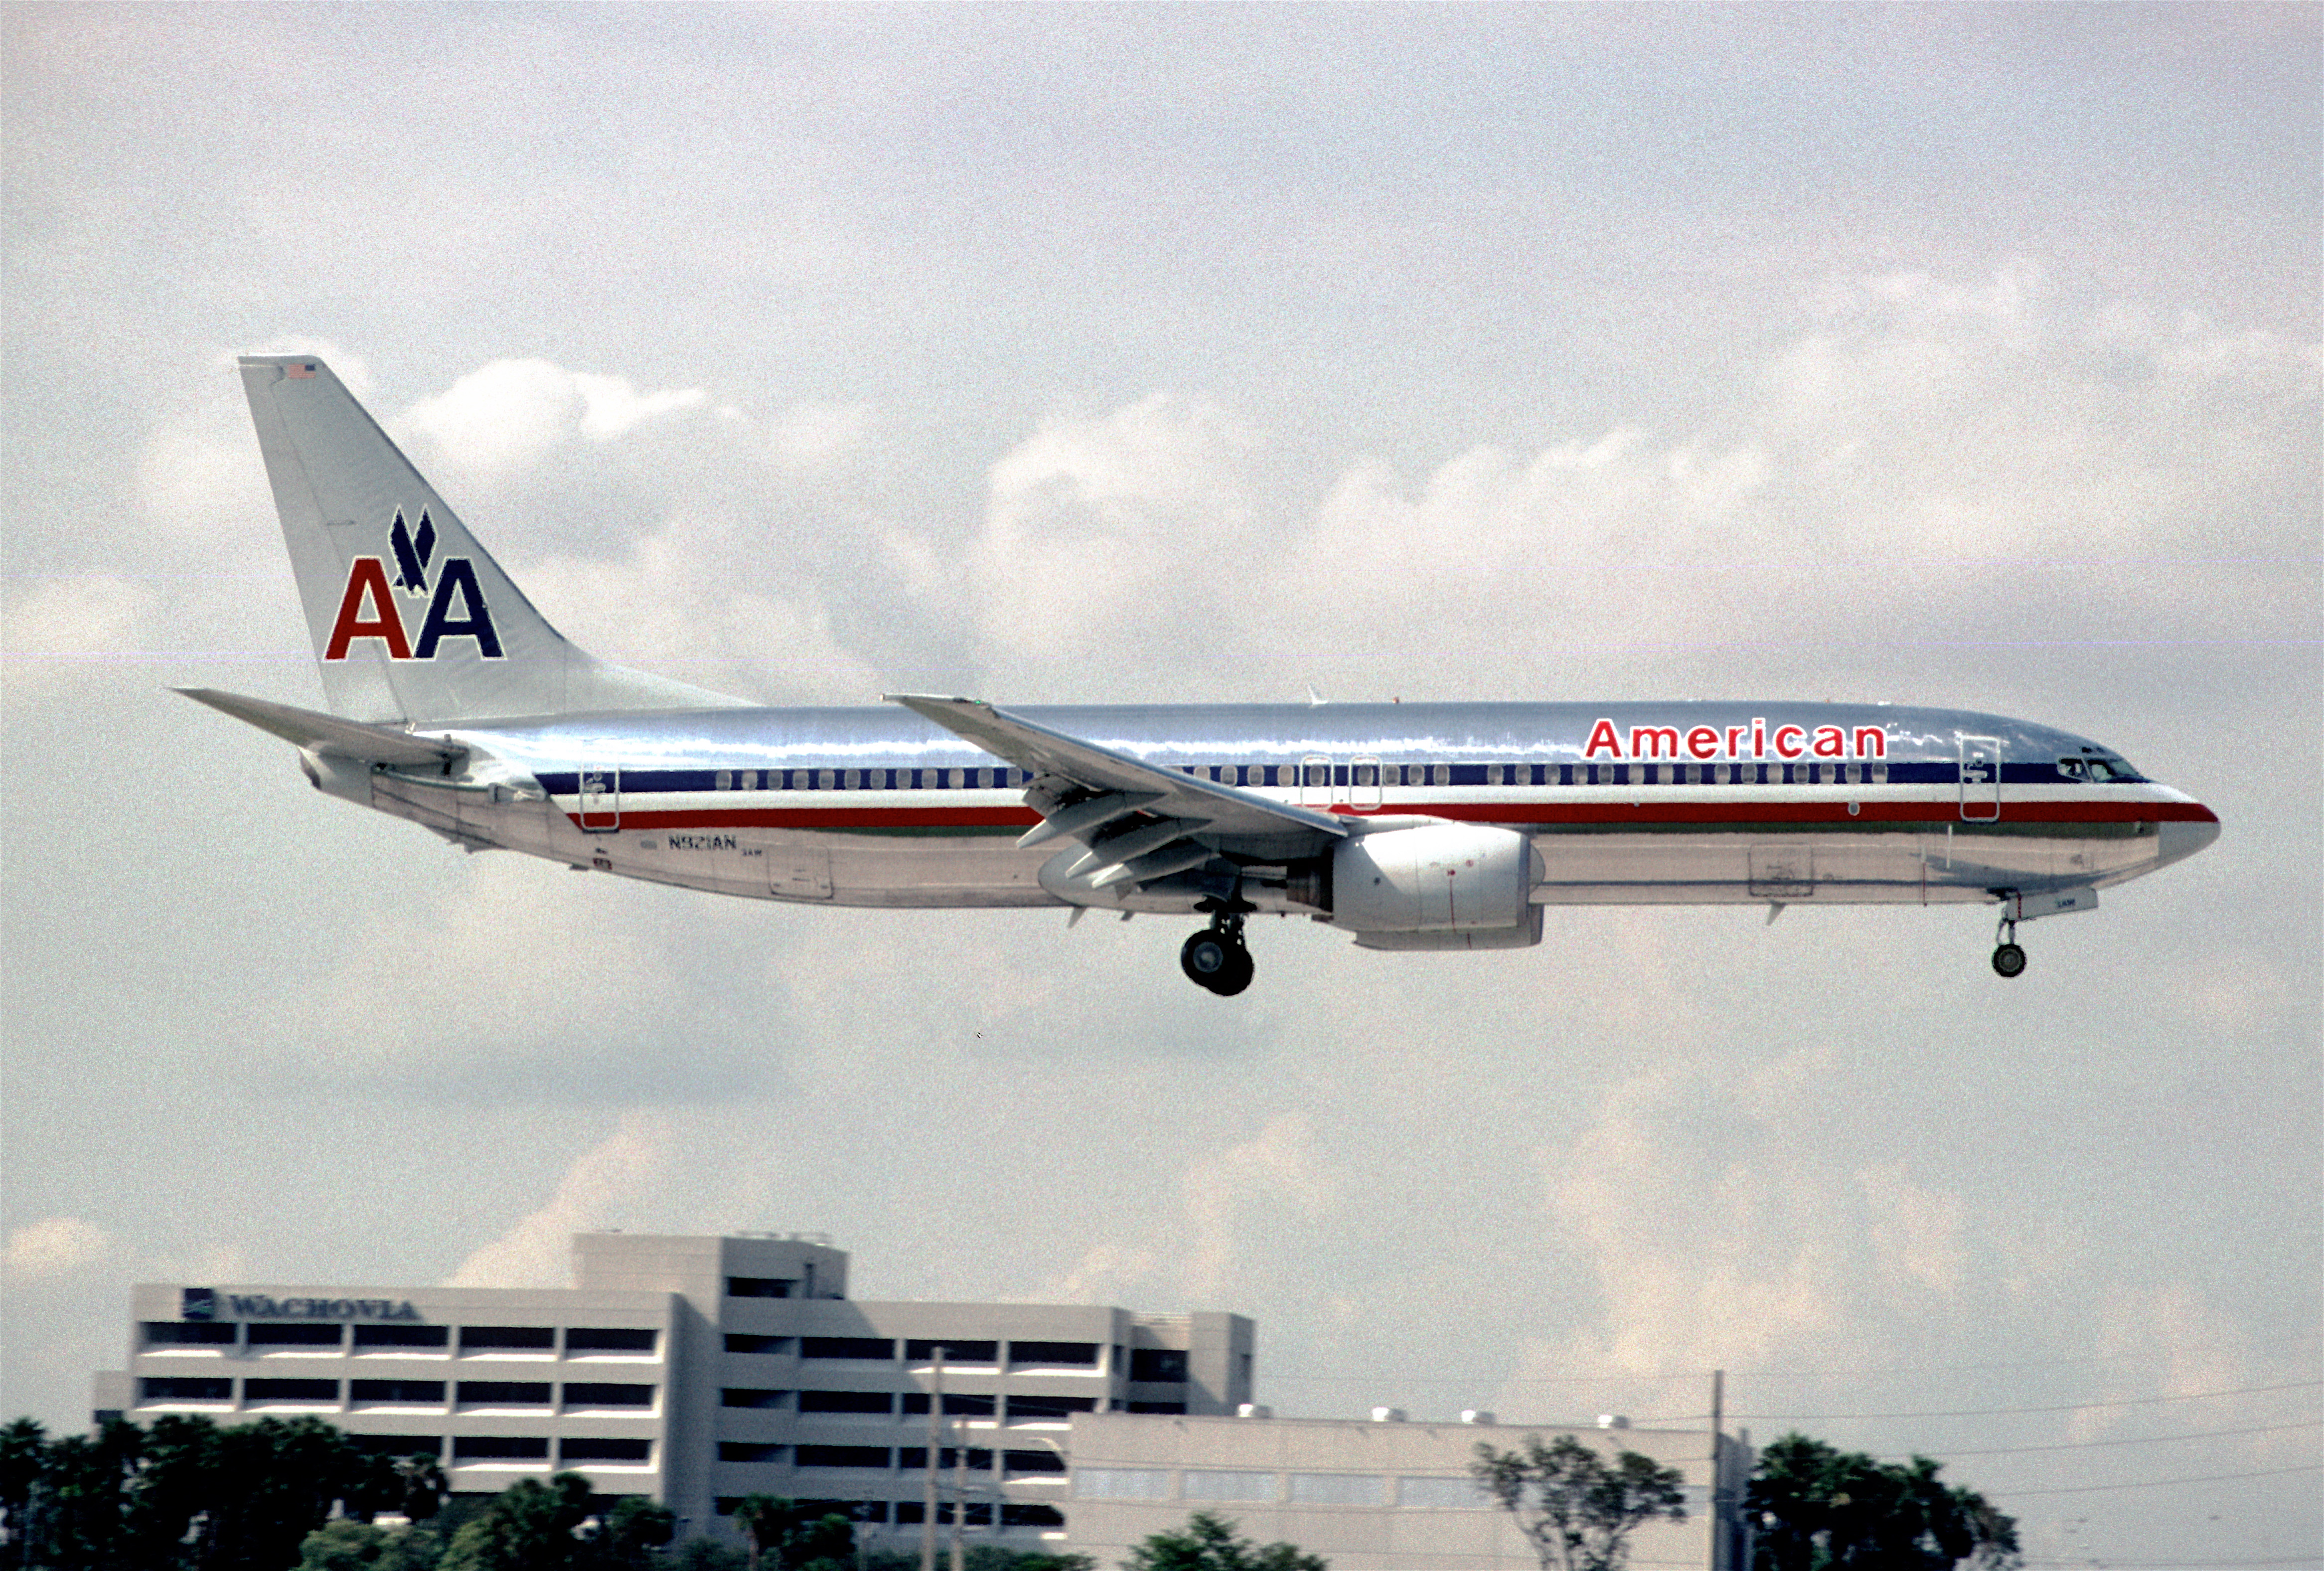 File:American Airlines, Boeing 737-823(WL), N969AN - LAX (22300501588).jpg  - Wikimedia Commons